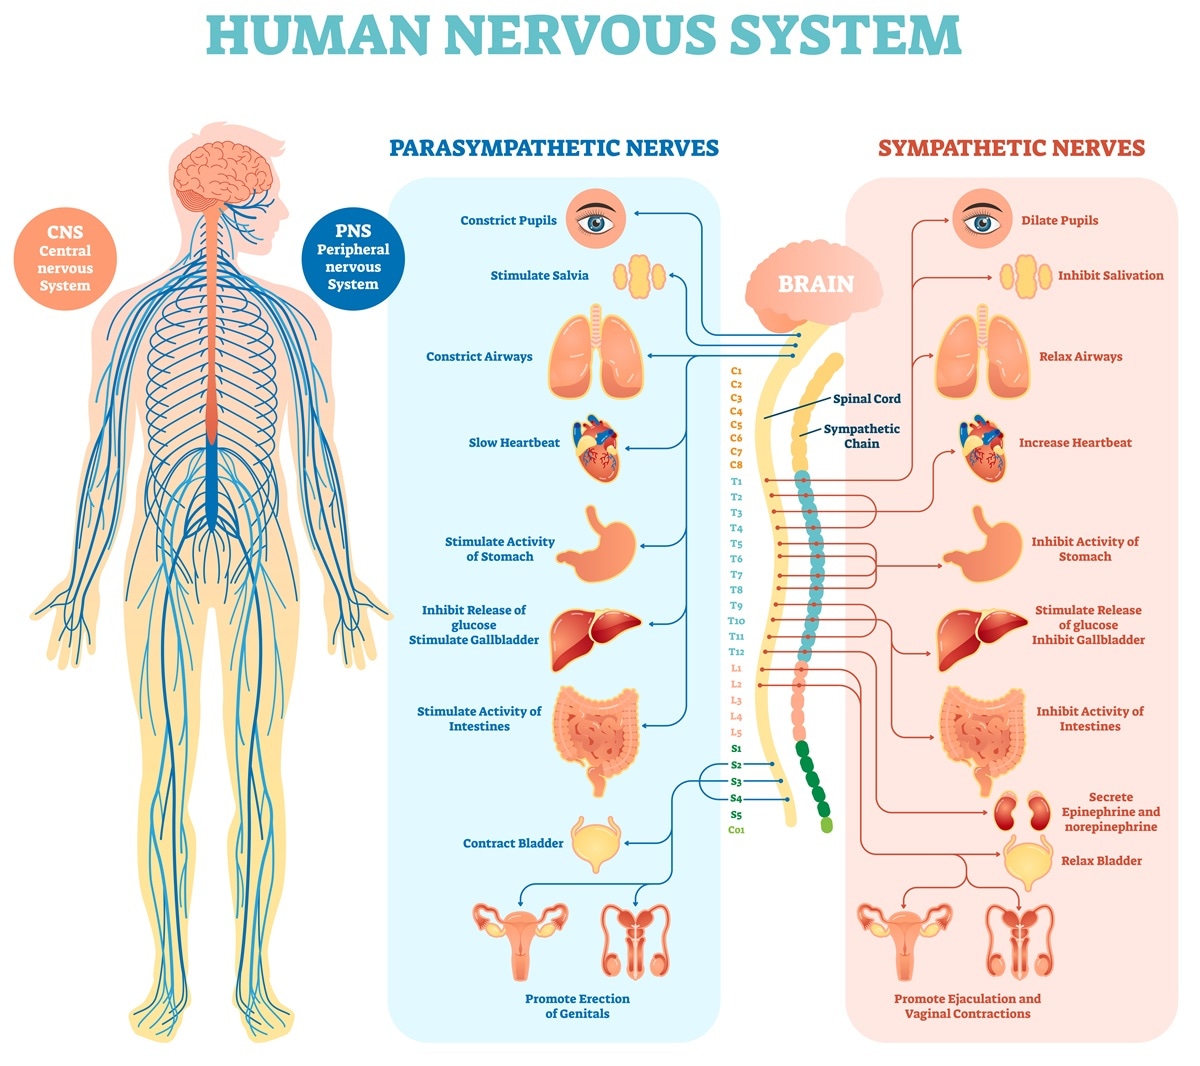 What two systems regulate and coordinate body functions?